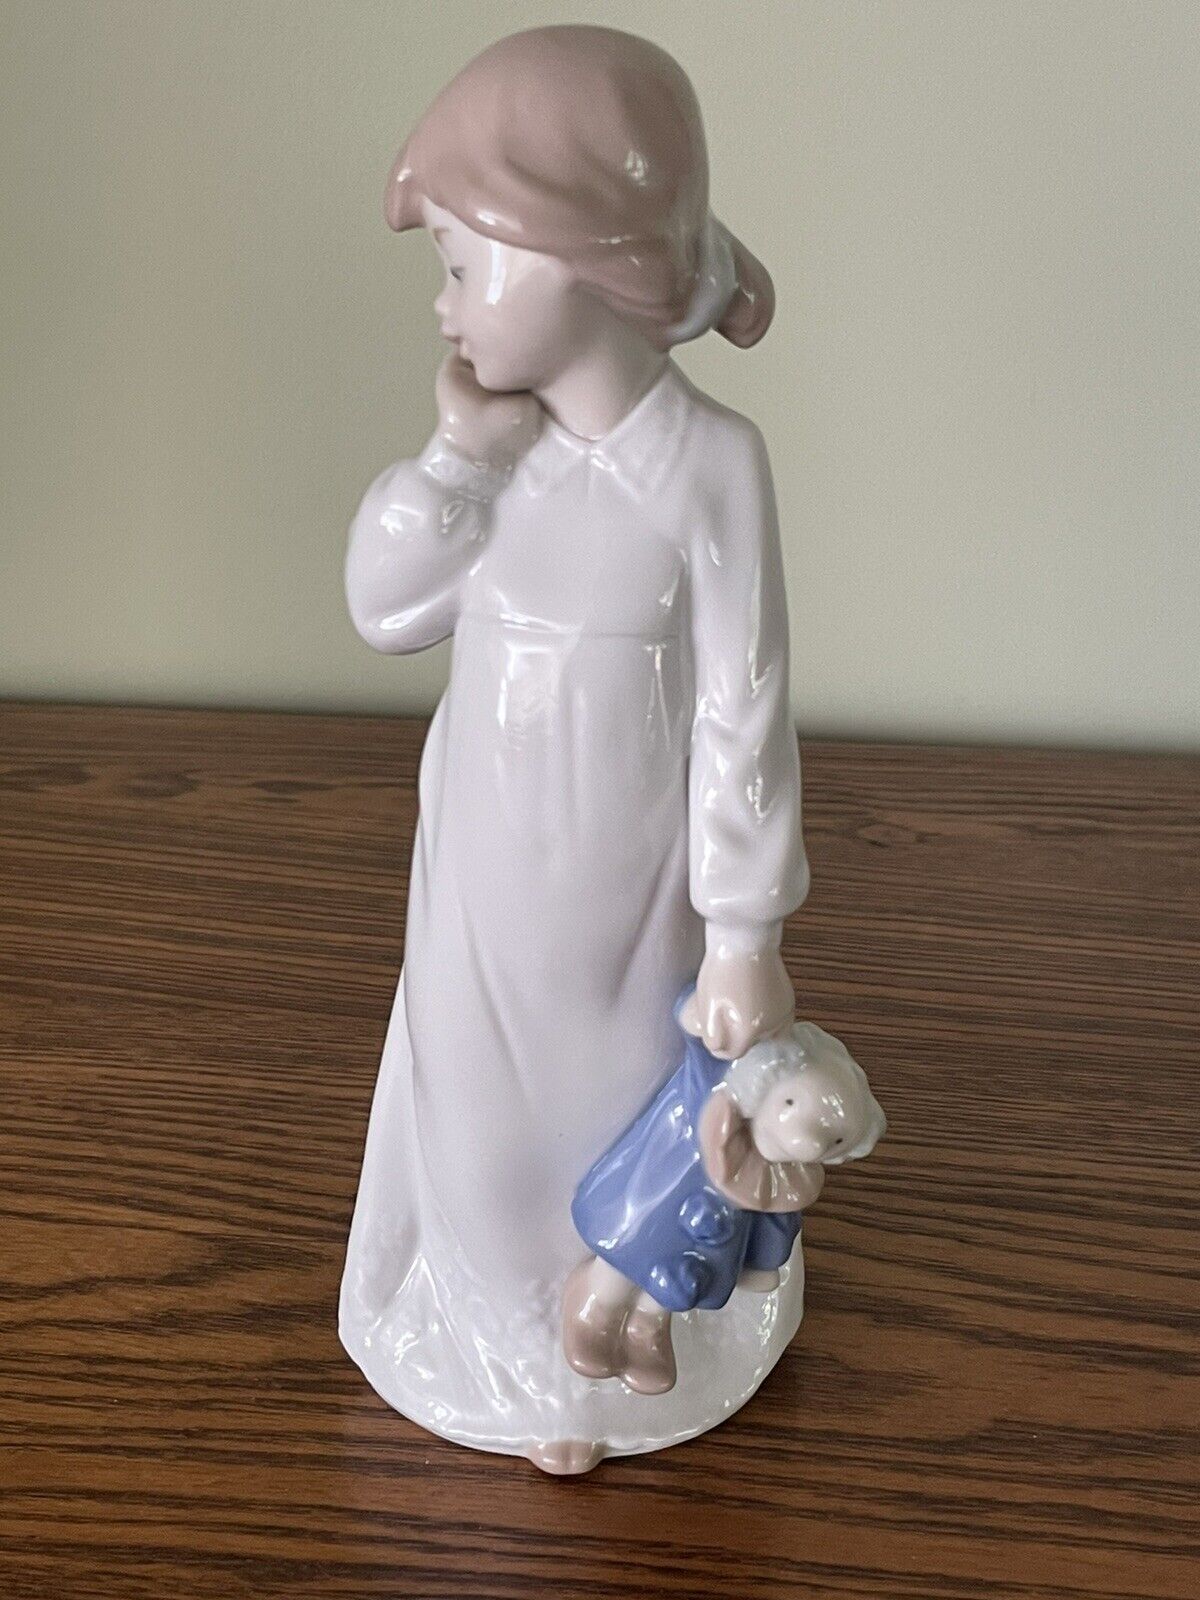 Vintage Lladro “My Rag Doll” - Young Girl w/ Clown Toy - NAO Porcelain Figurine